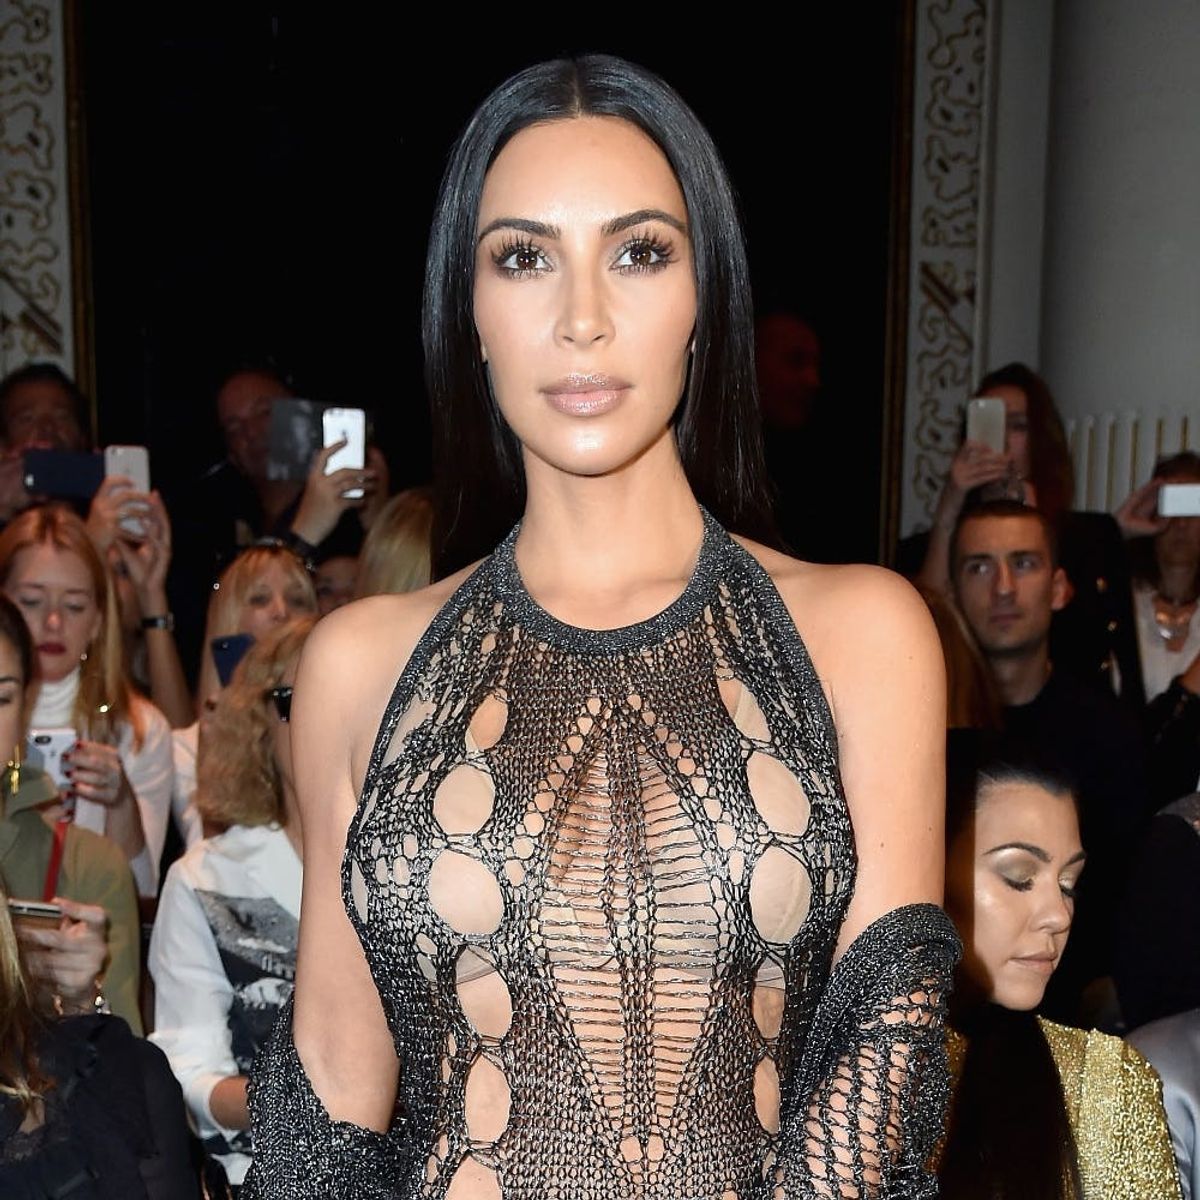 Social Media May Have Leaked Kim K’s Location to the Robbers